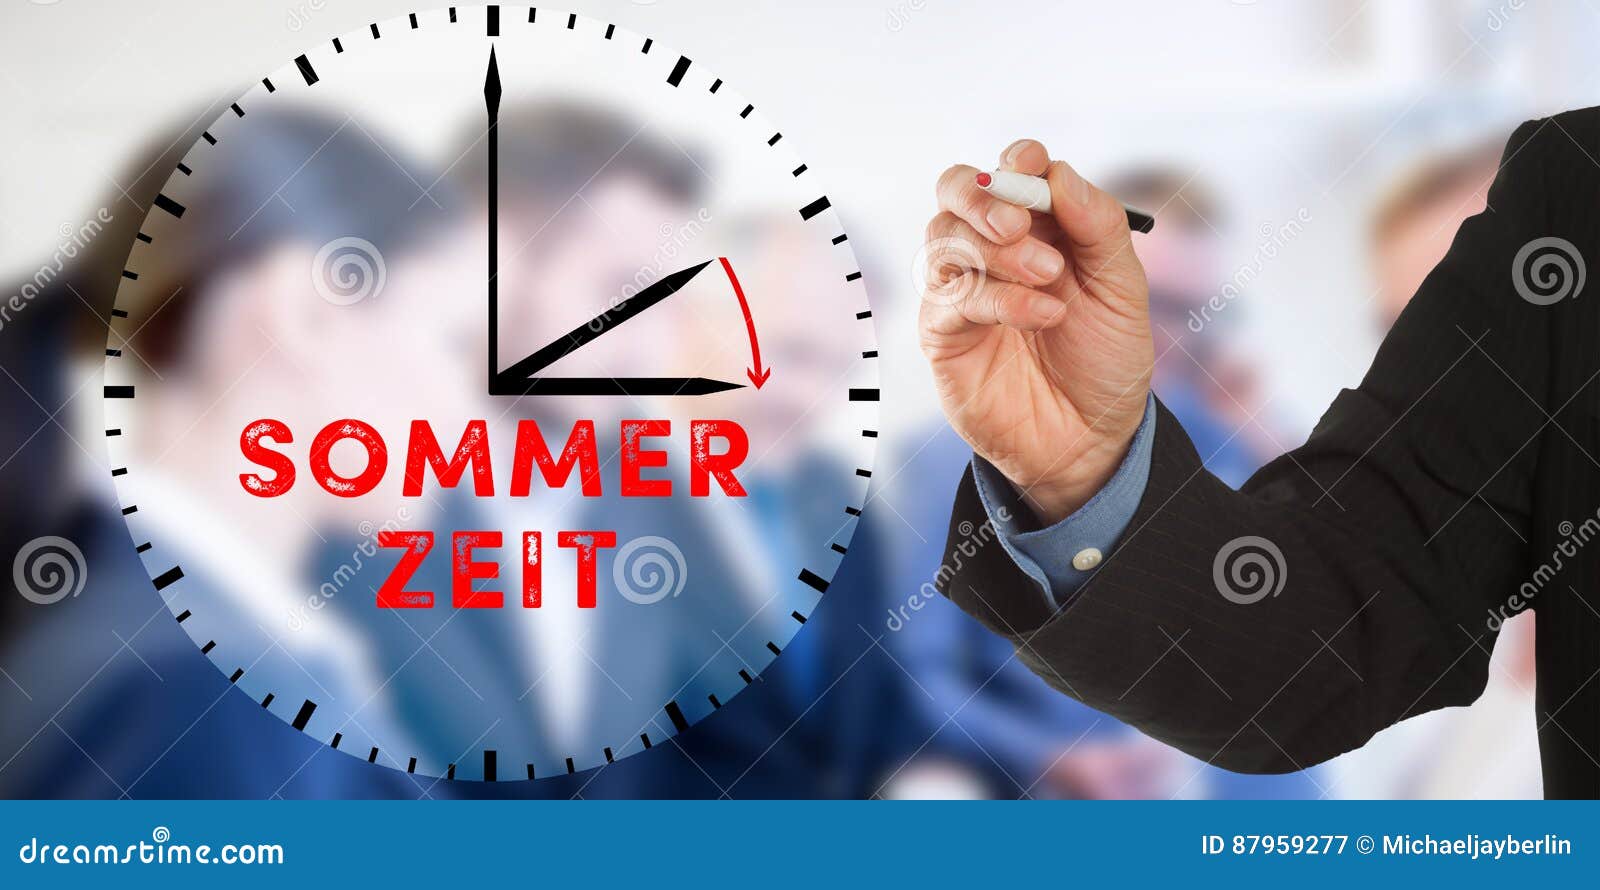 Sommerzeit, German Daylight Saving Time, Business Man Hand Writing with